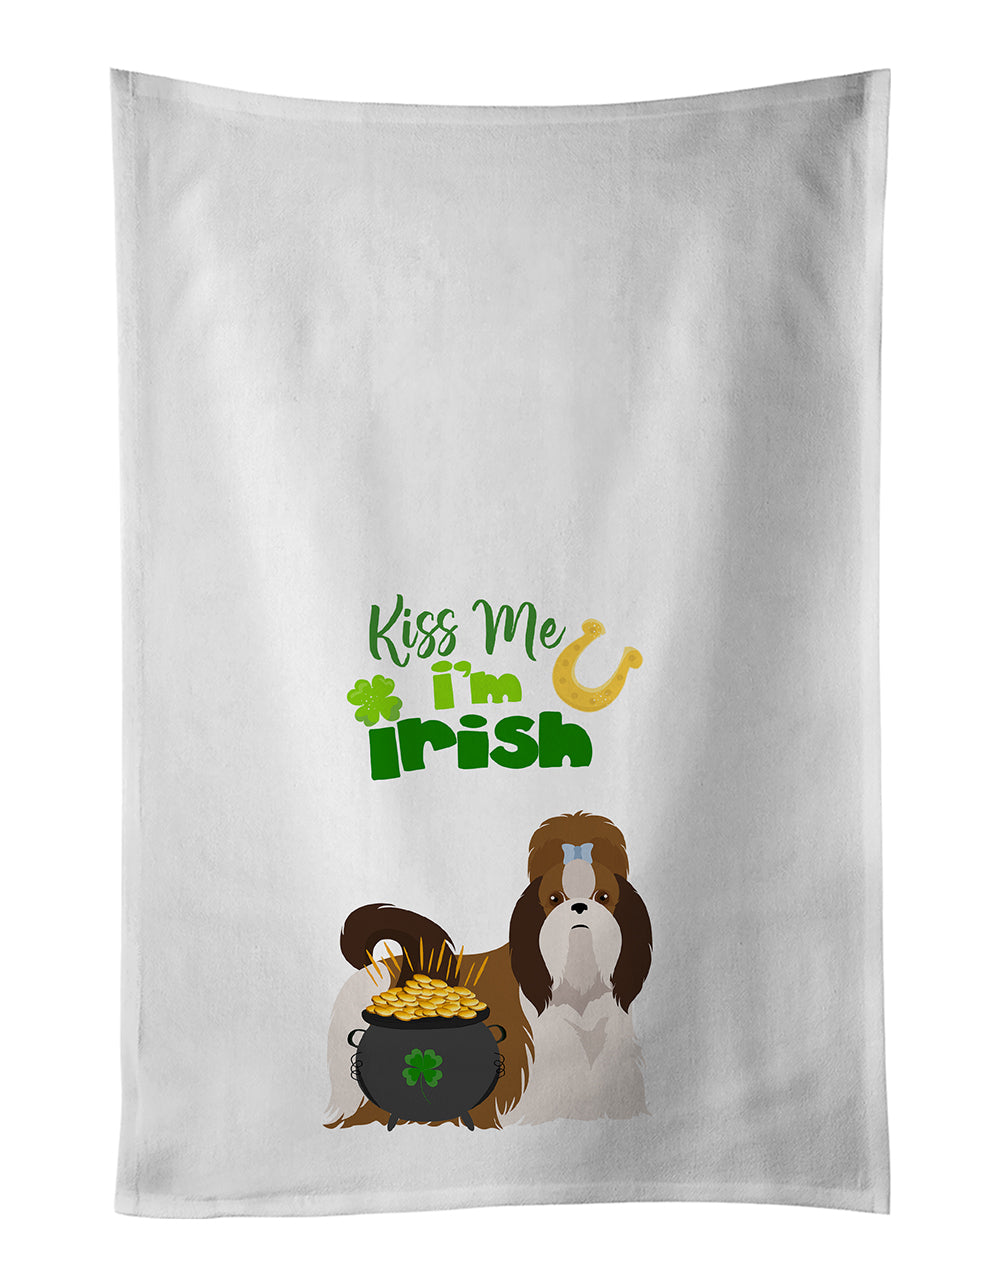 Buy this Red and White Shih Tzu St. Patrick's Day White Kitchen Towel Set of 2 Dish Towels